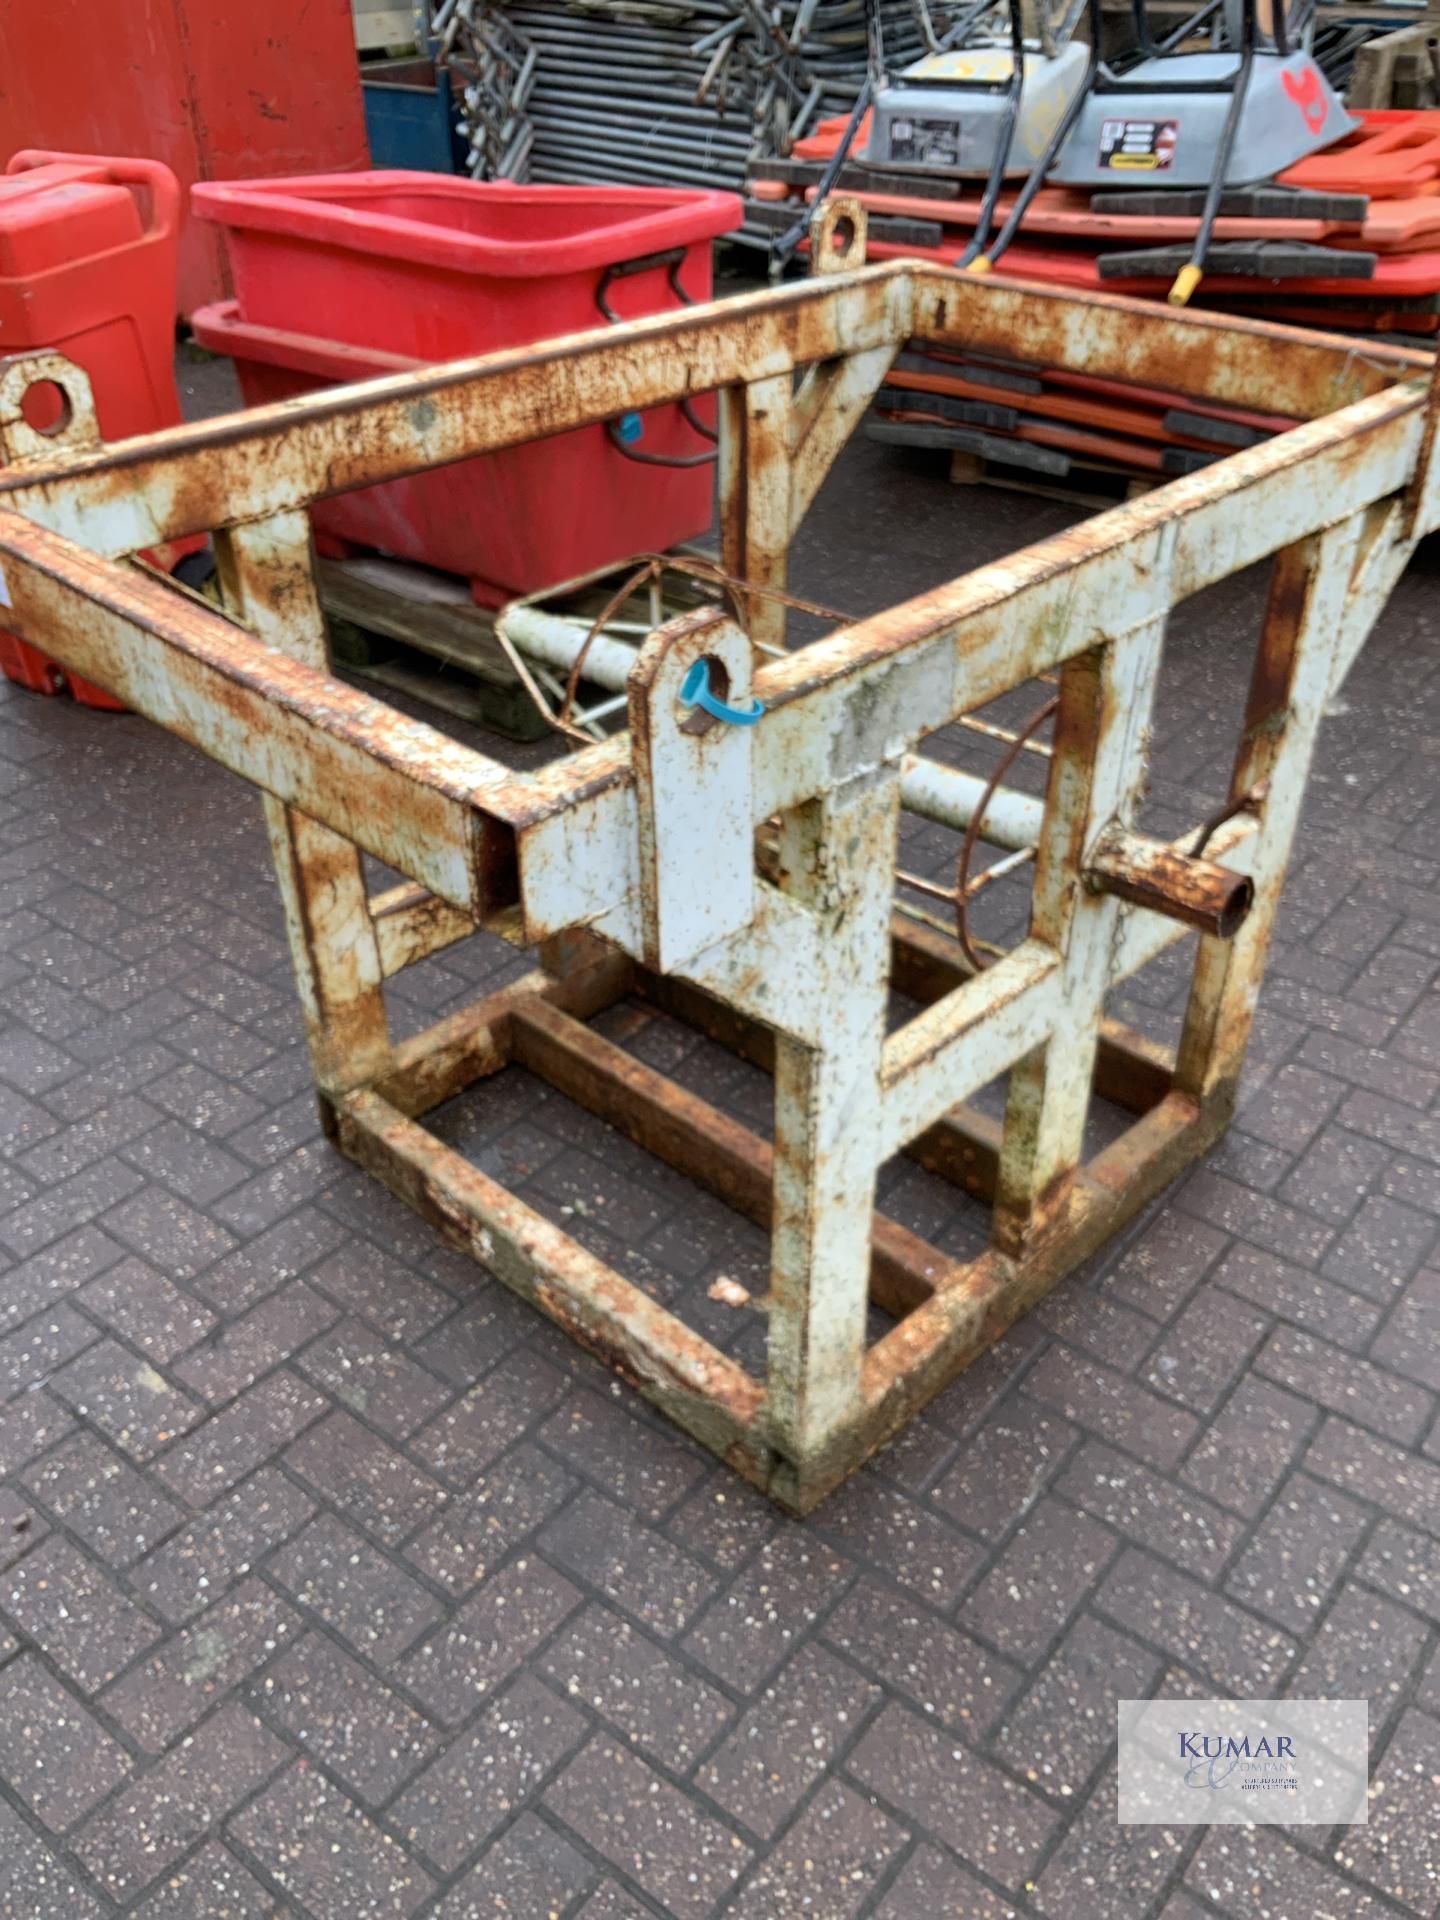 wire reel lifting frame - Image 2 of 4